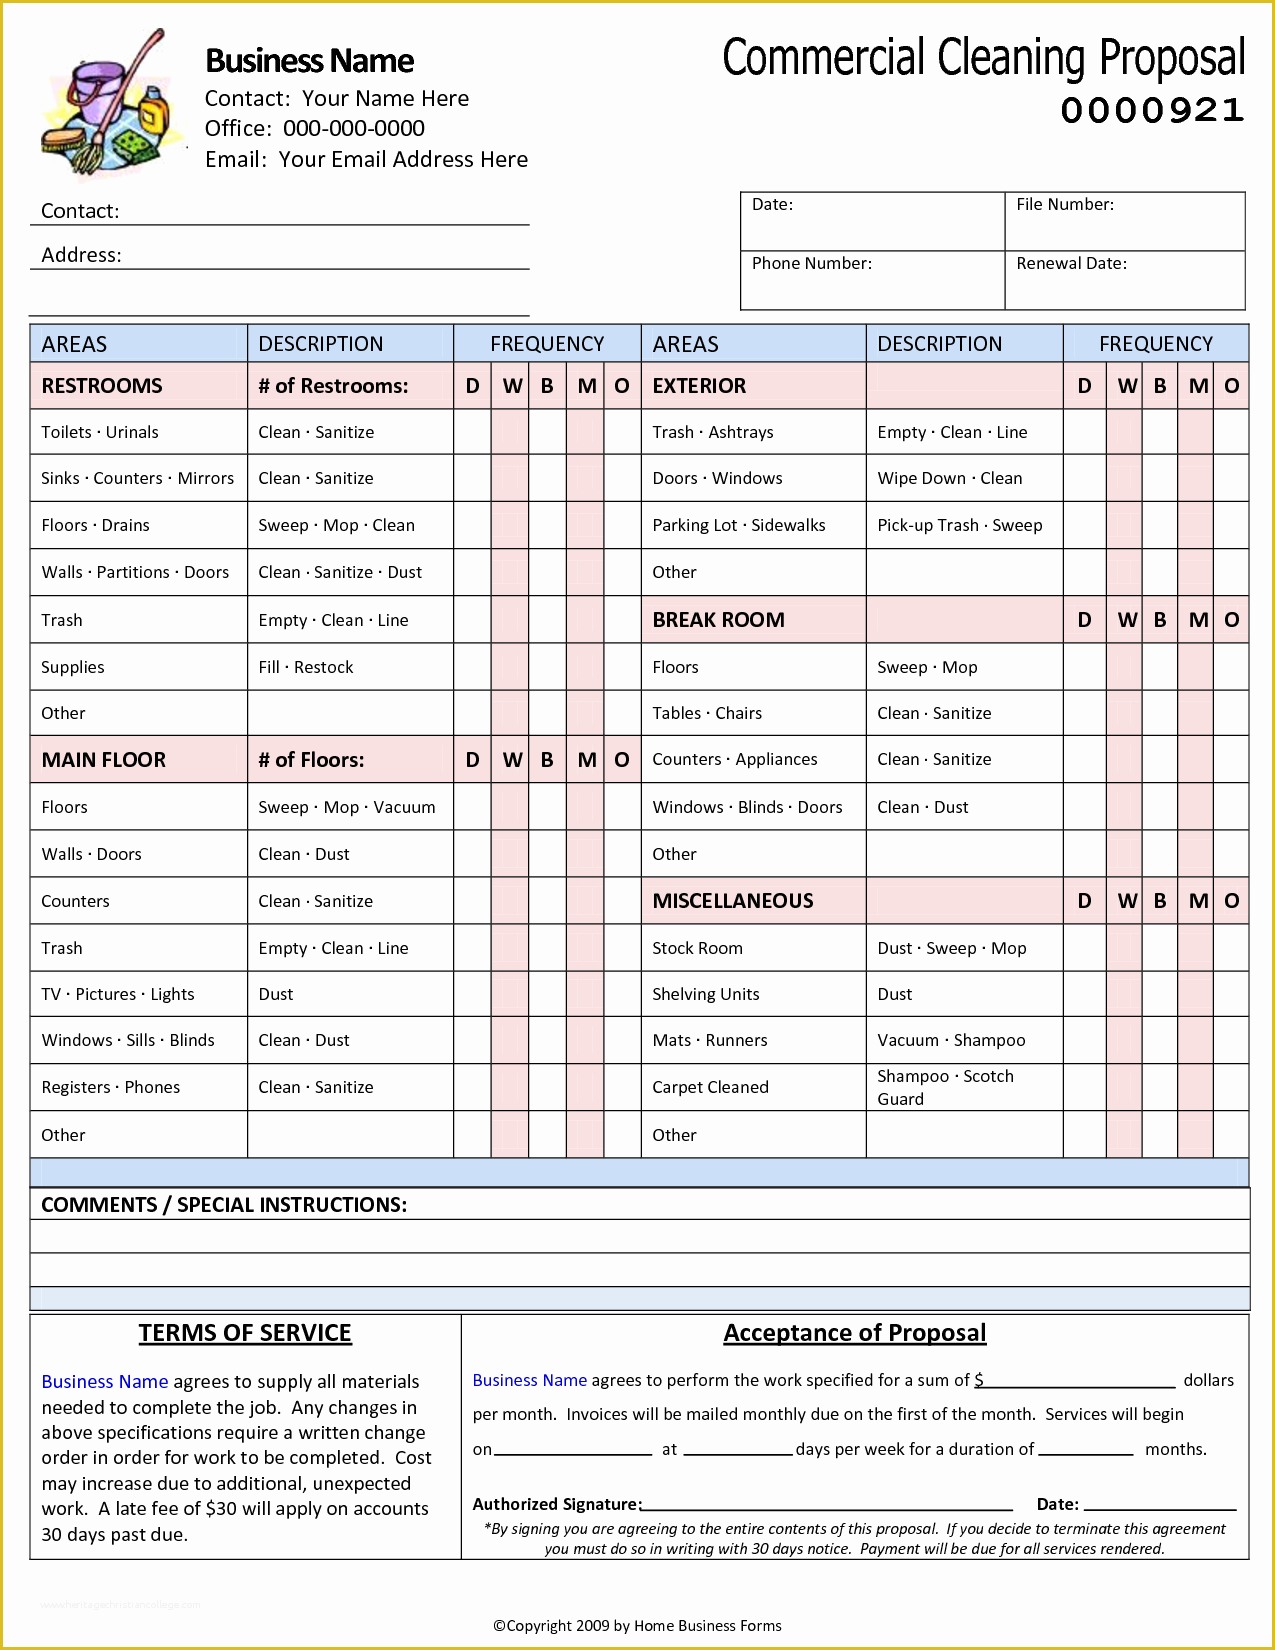 free-cleaning-proposal-template-of-printable-blank-bid-proposal-forms